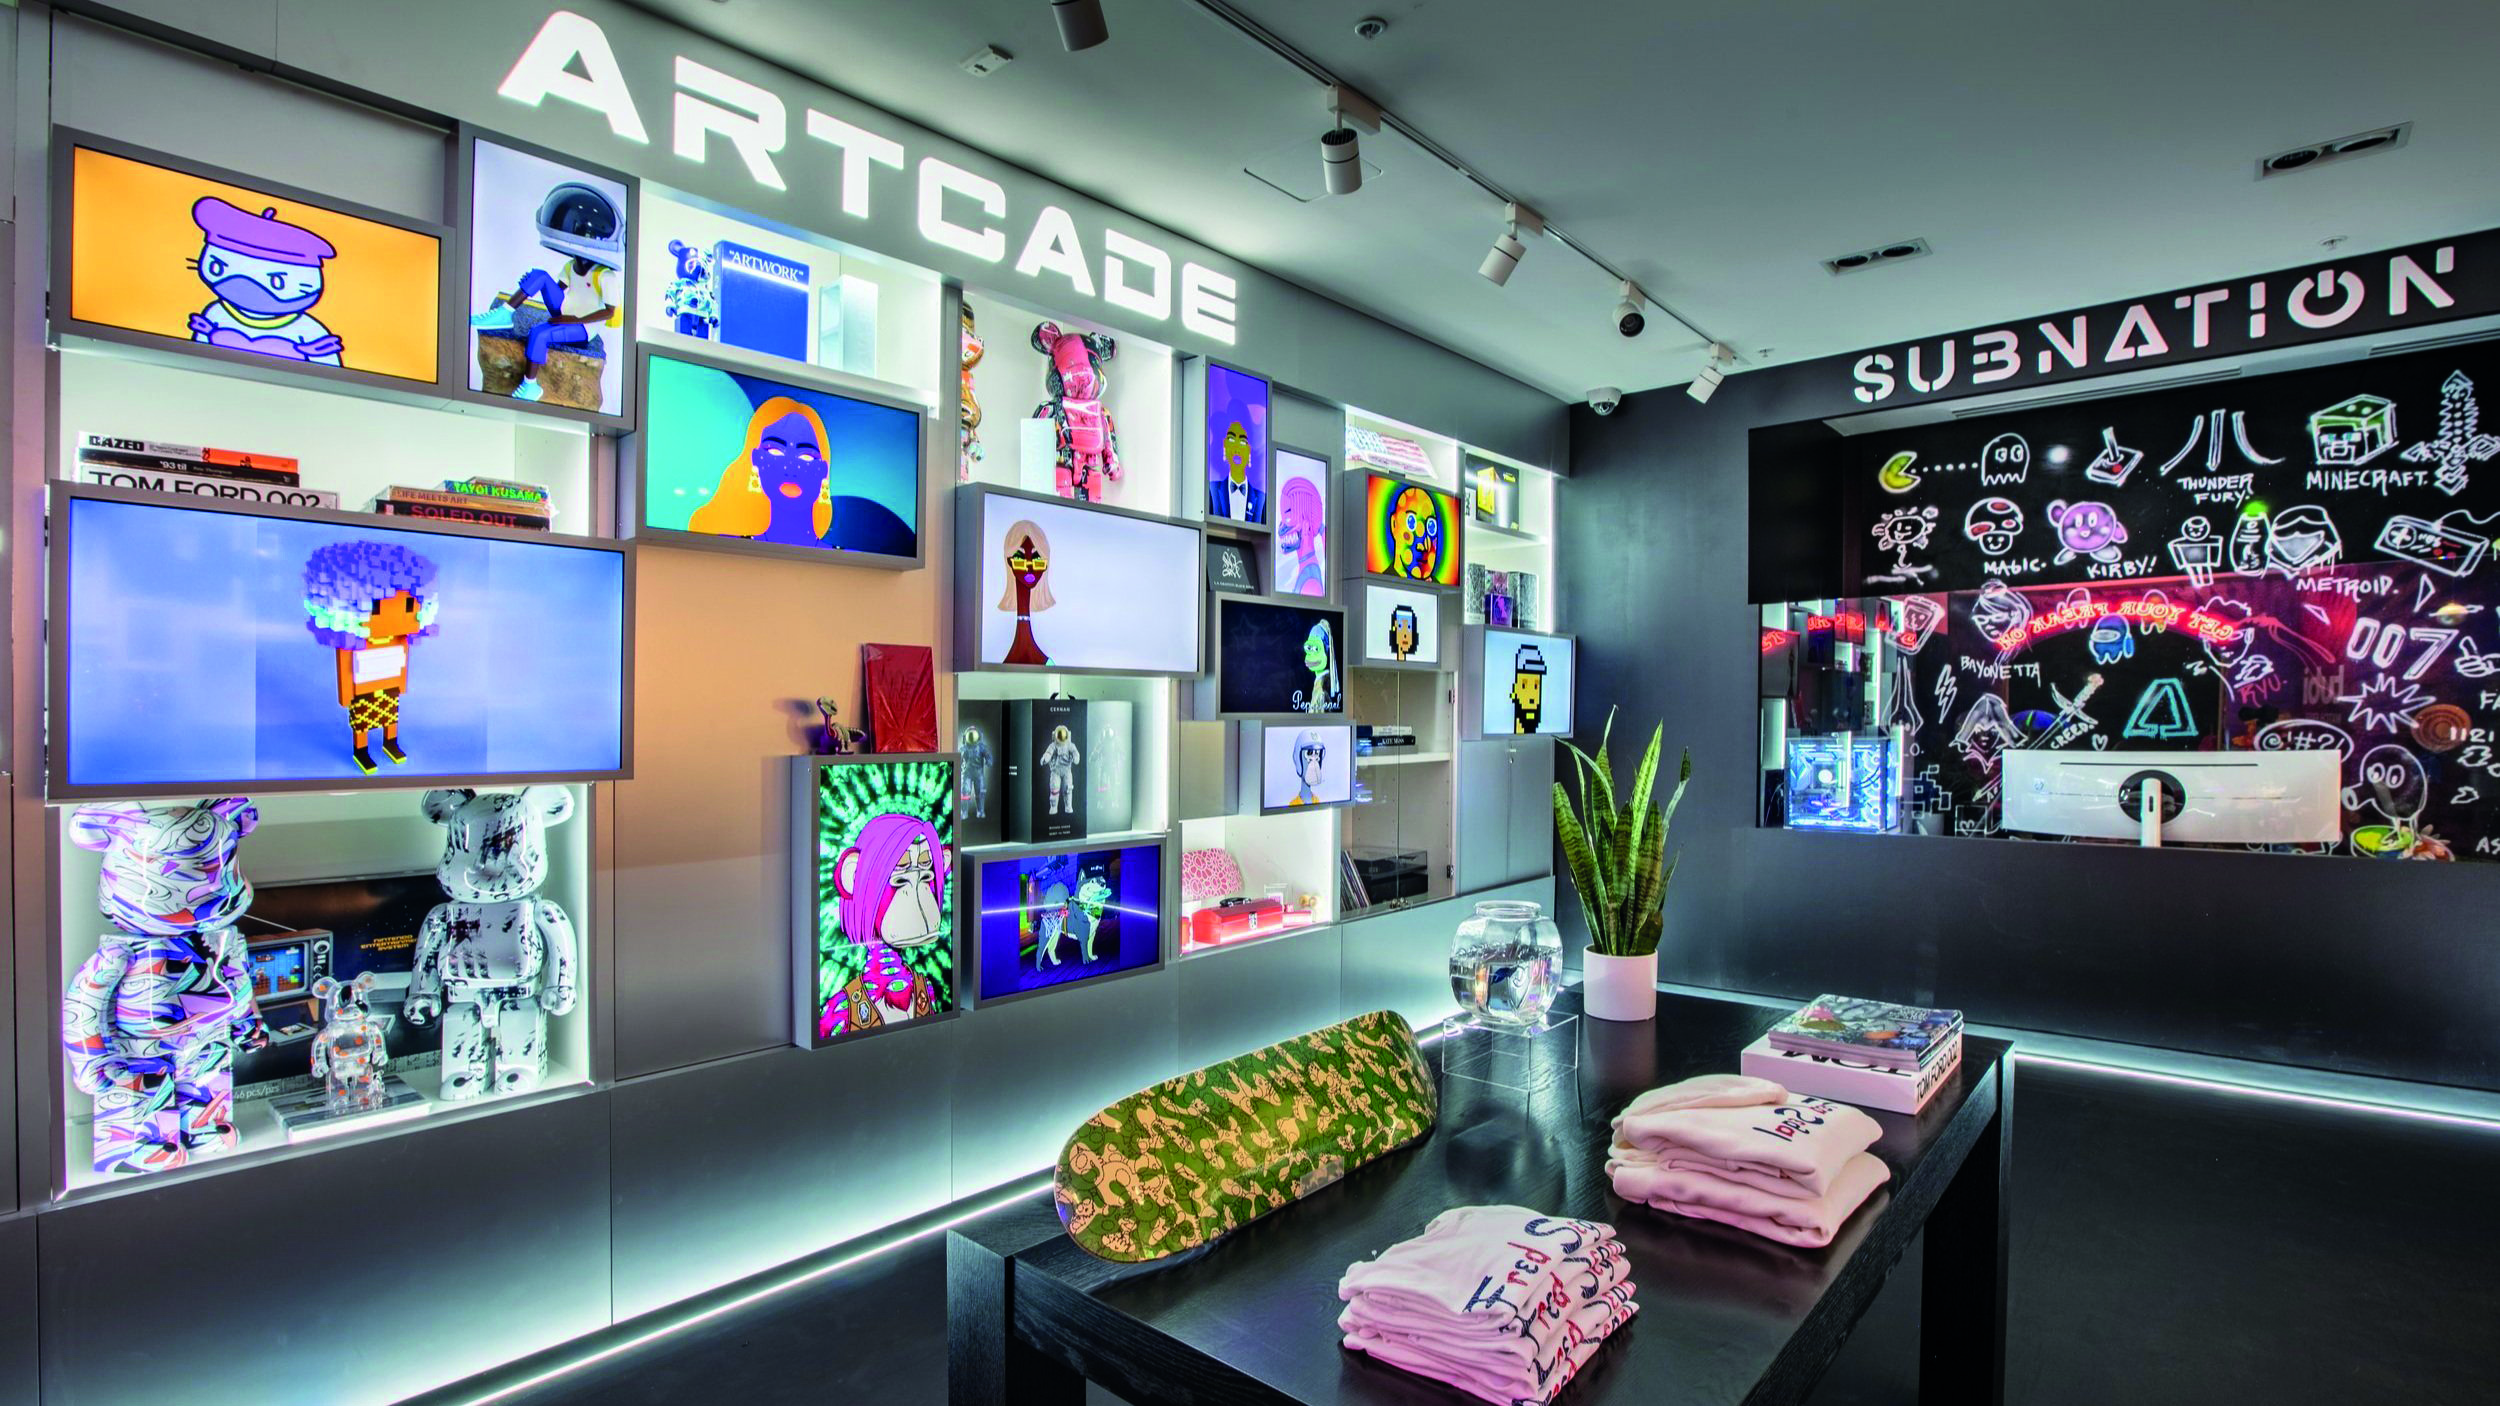 Store drive to metaverse: Balenciaga has launched a Fortnite capsule collection in its physical stores to unlock outﬁts in the game.